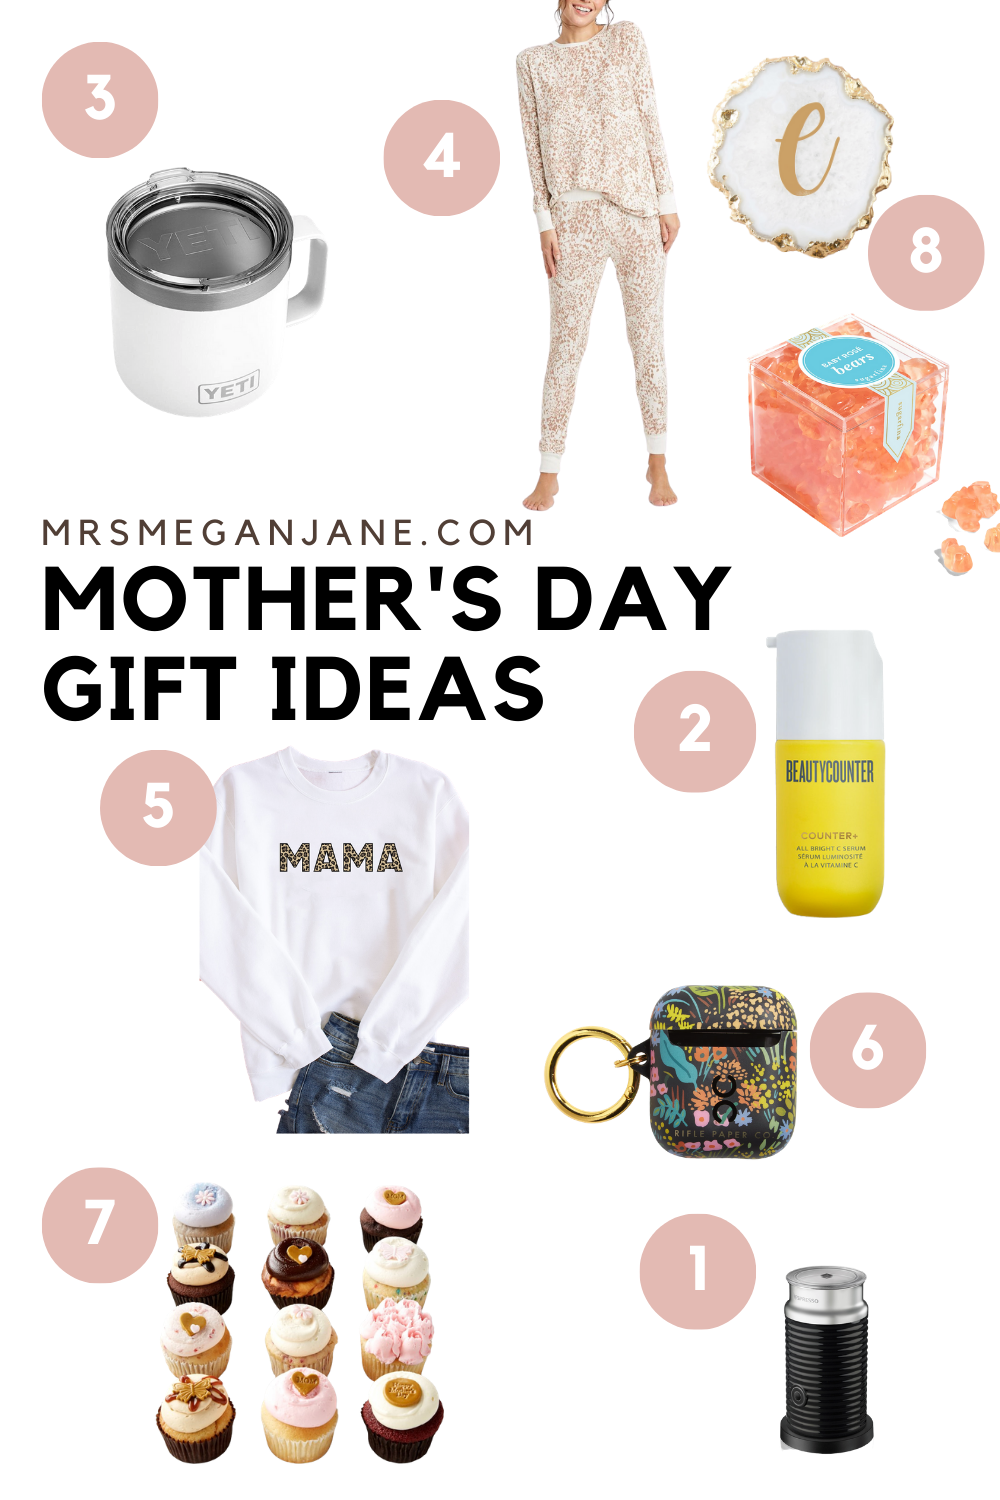 REALLY Last-Minute Mother's Day Gift Ideas!